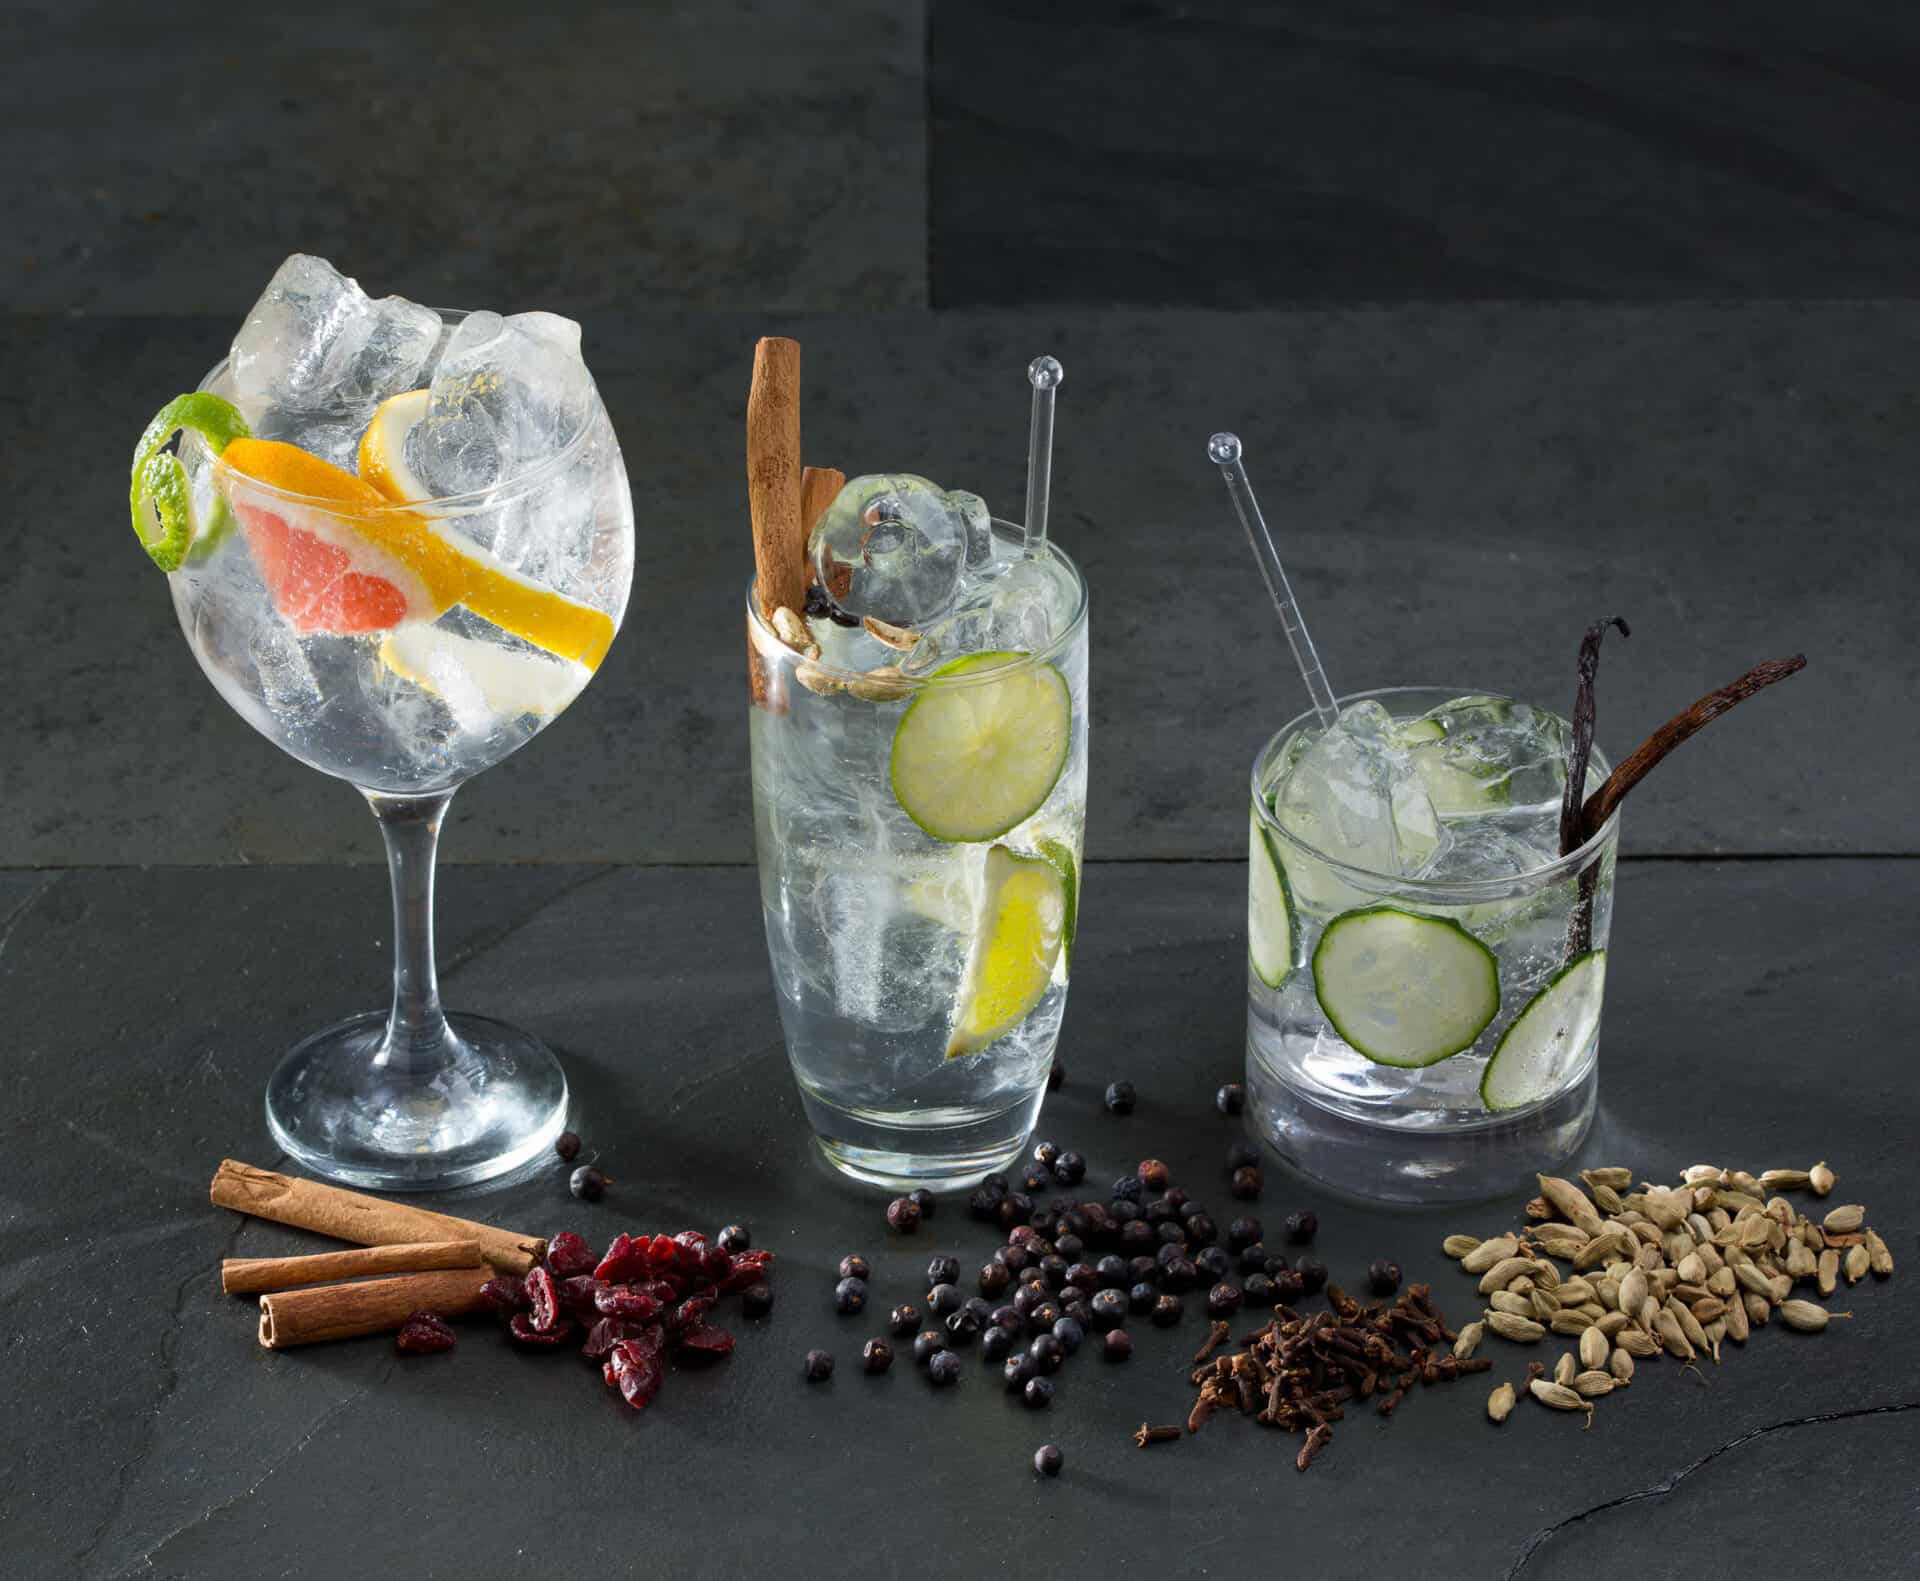 Three gin perfect serves, article on gin in belfast